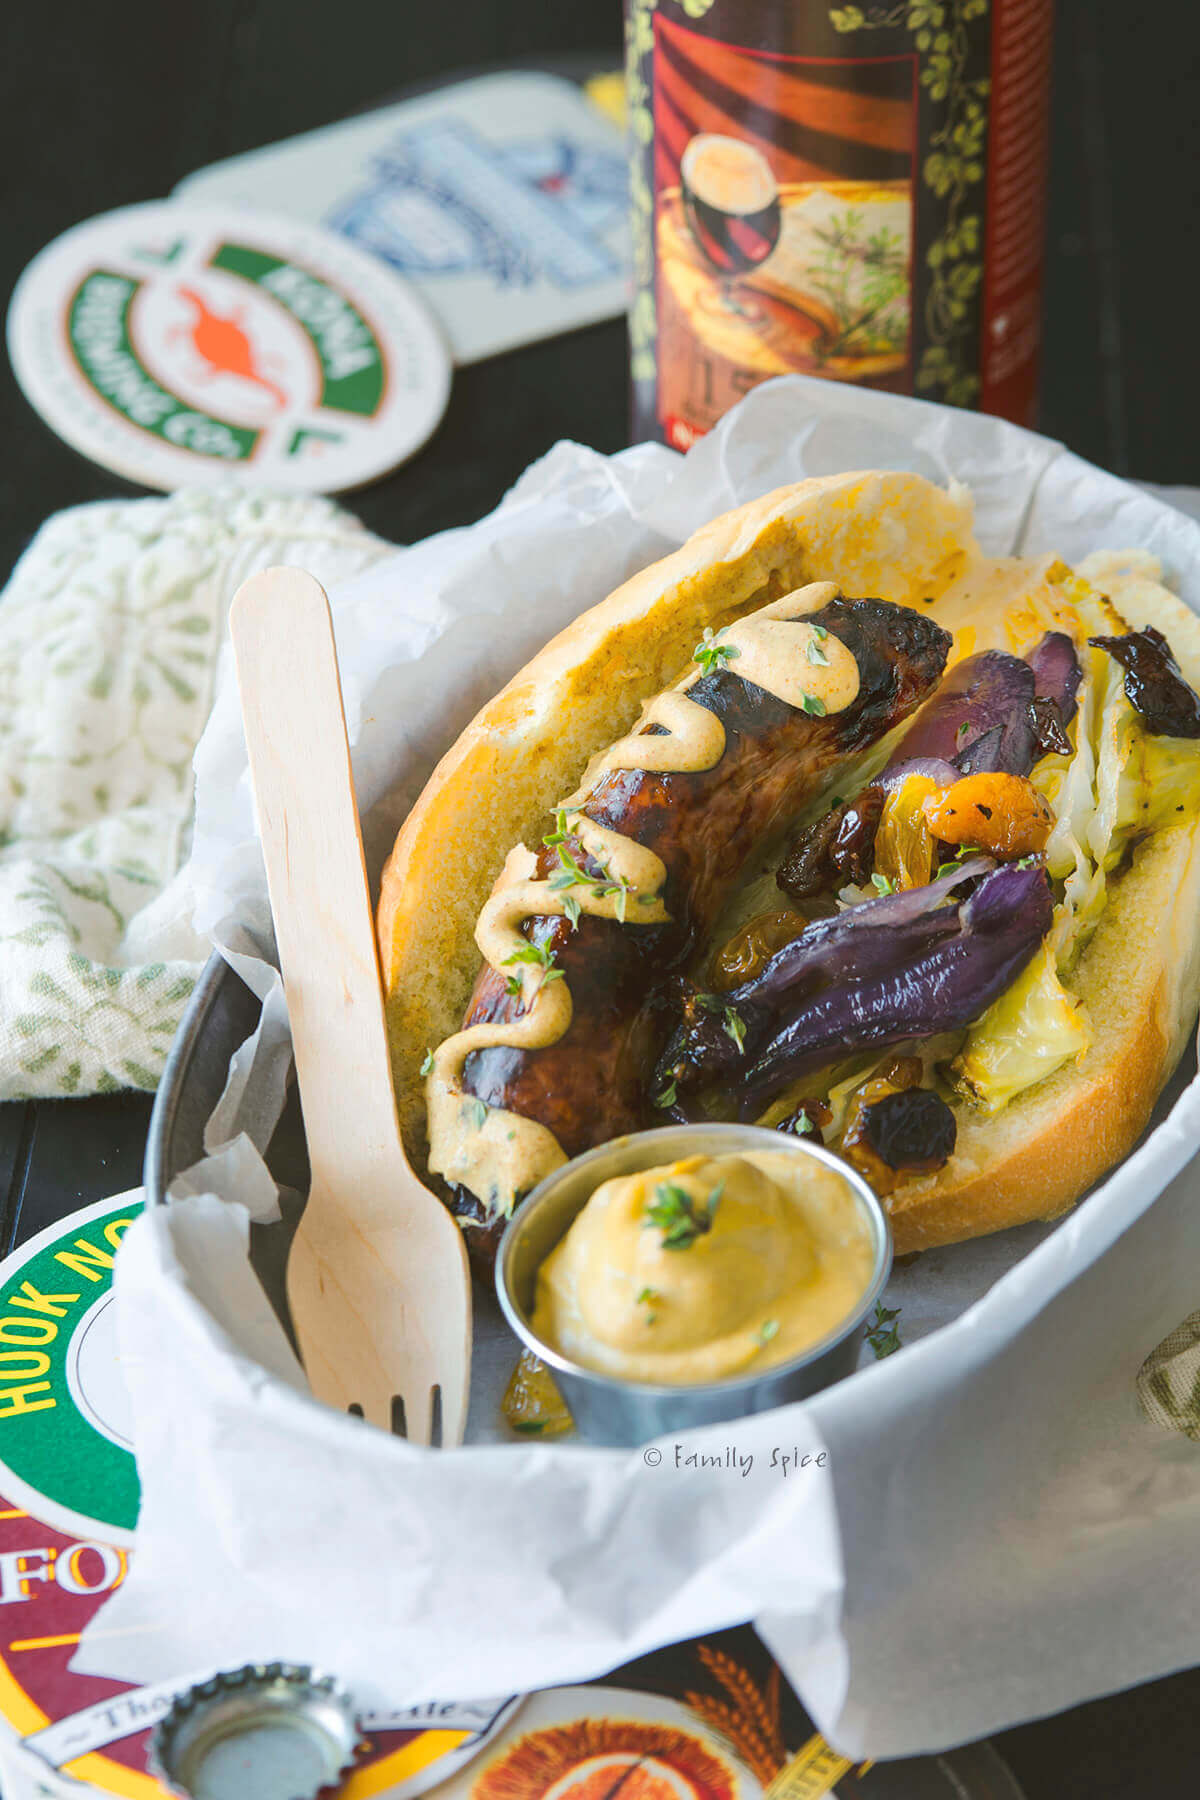 Oven baked bratwurst on a hoagie with mustard, roasted cabbage and red onions in a hoagie roll and in a metal food basket